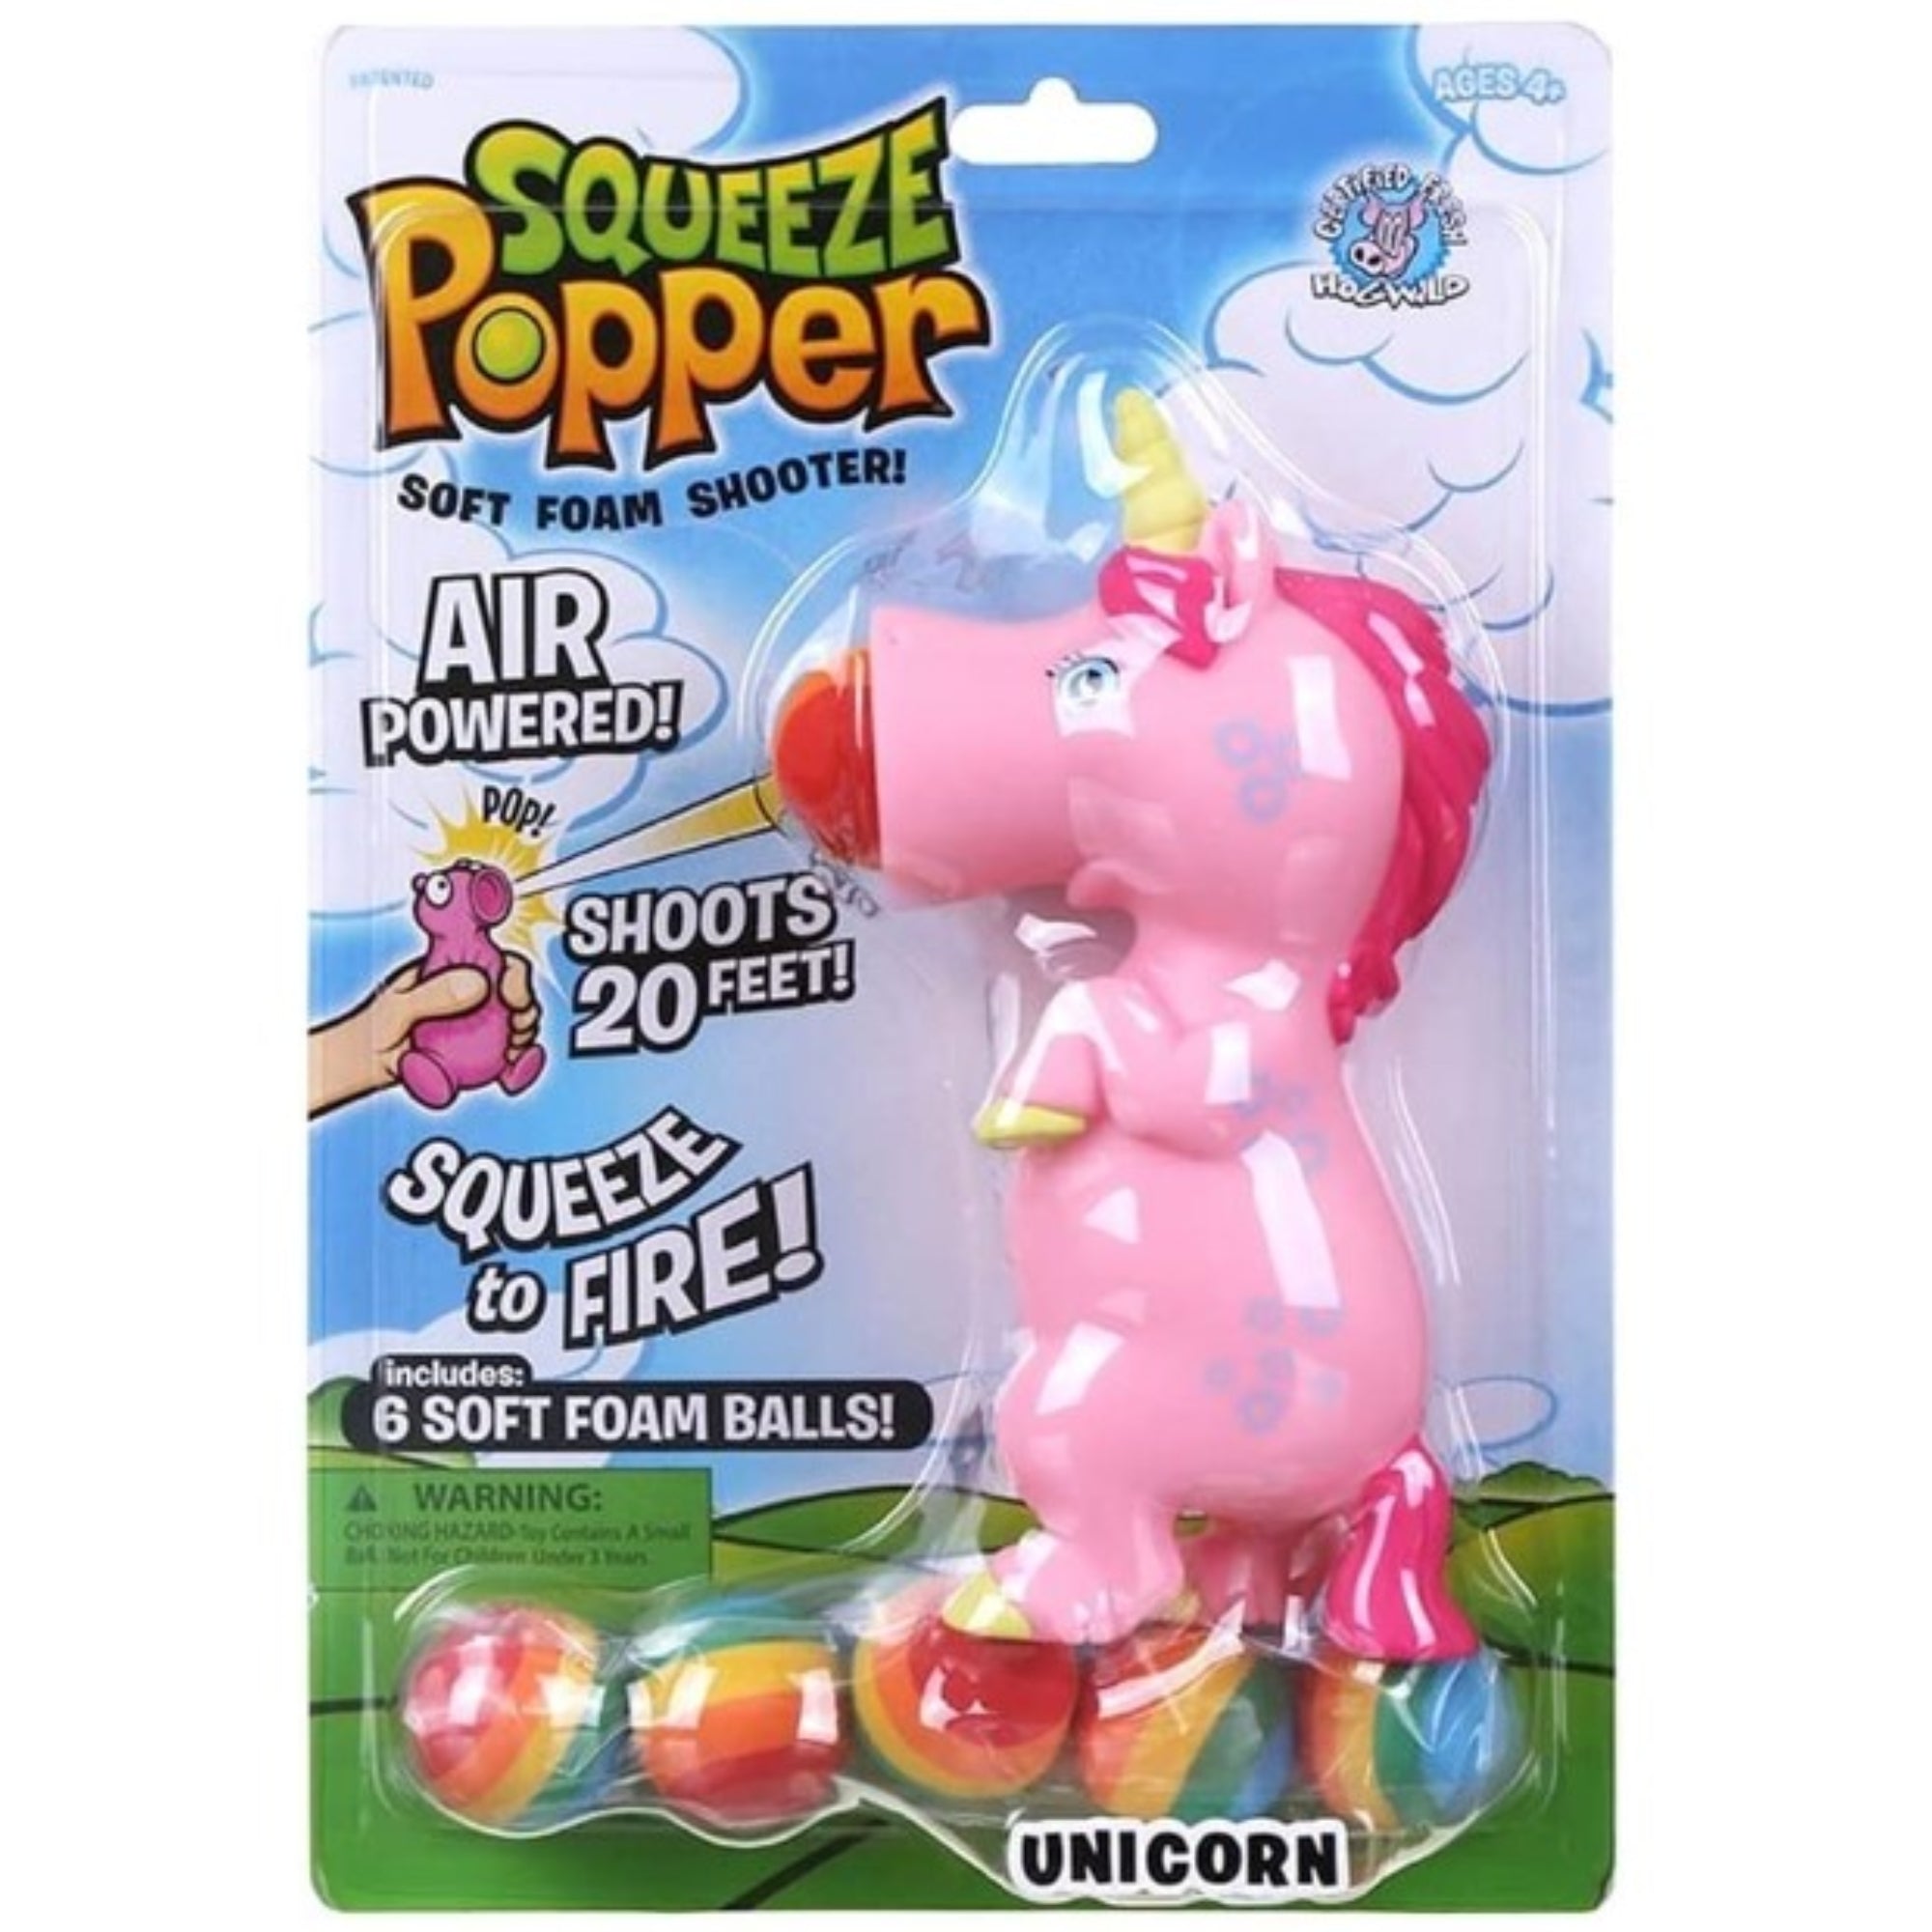 squeeze popper pink unicorn package